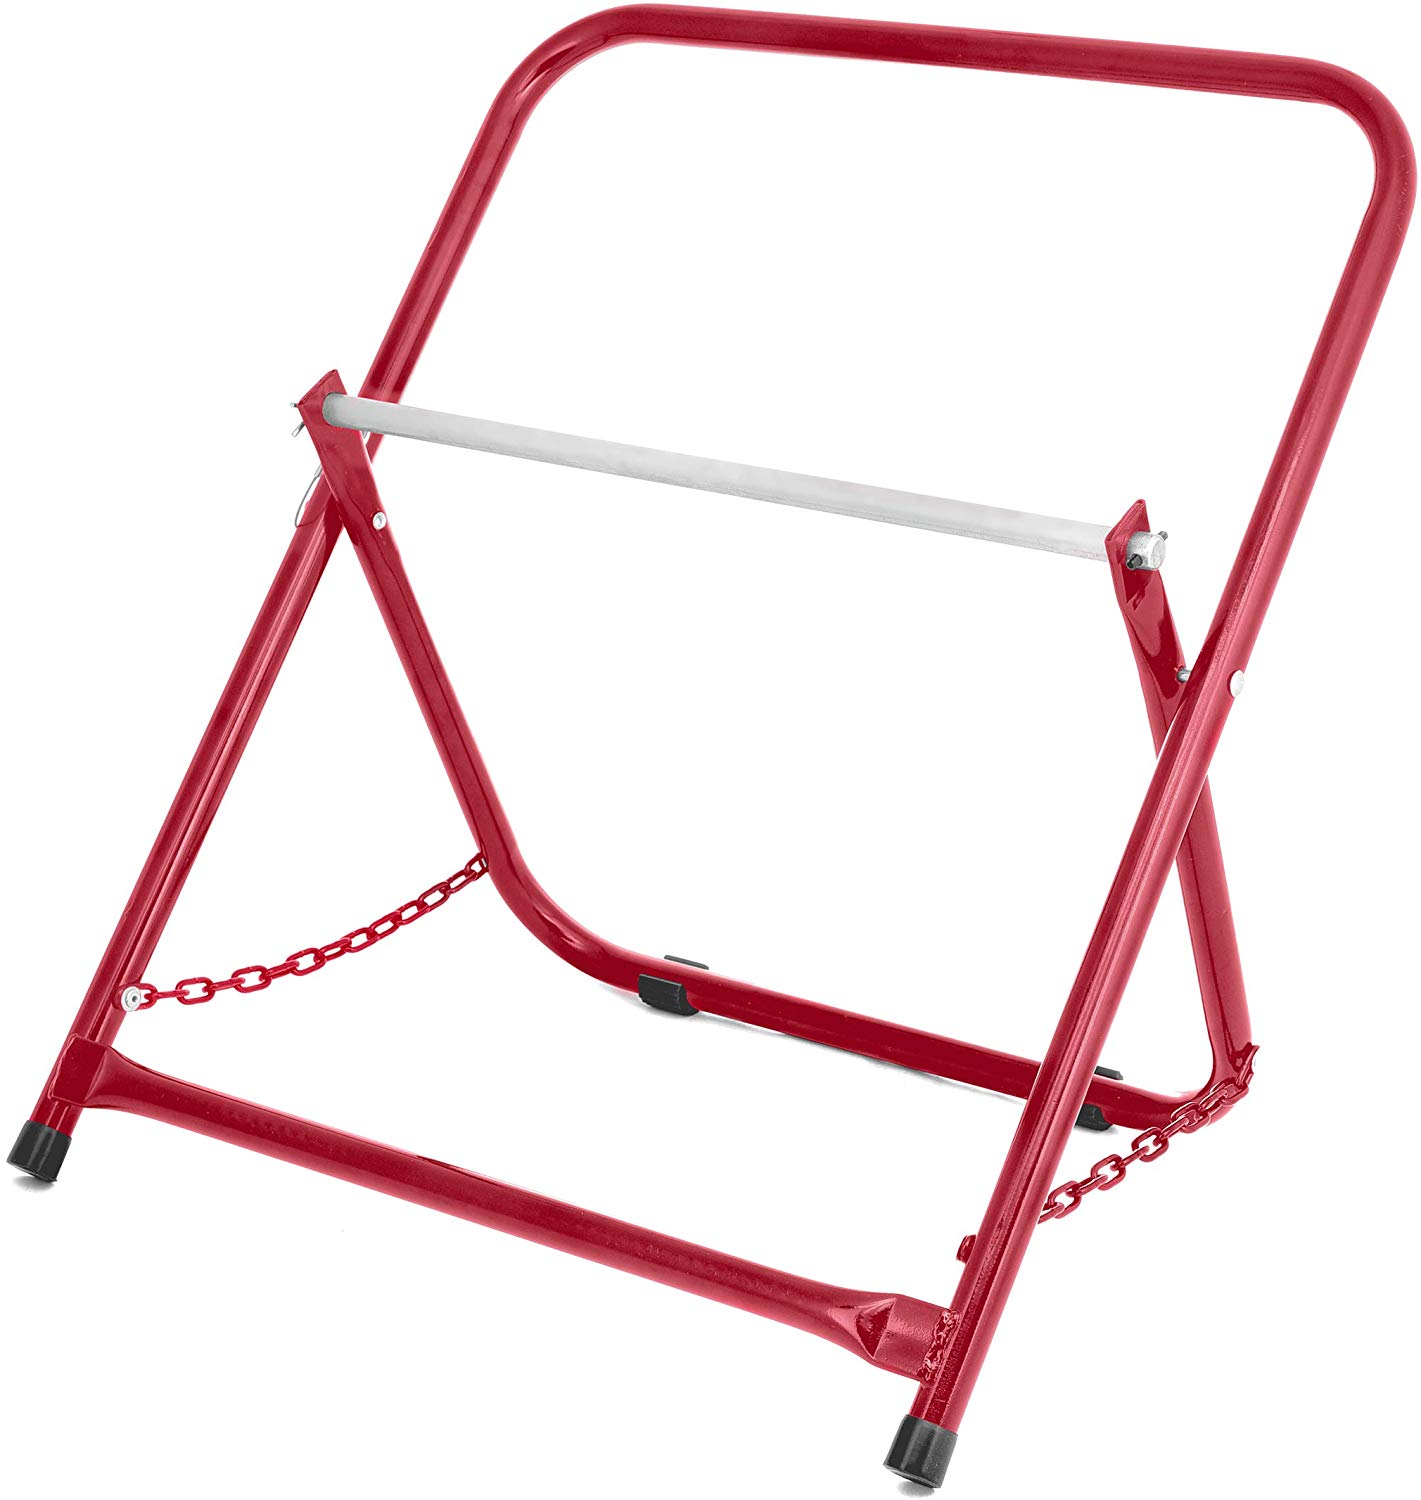 AdirPro AdirPro Foldable Wire Cable Caddy in Red at